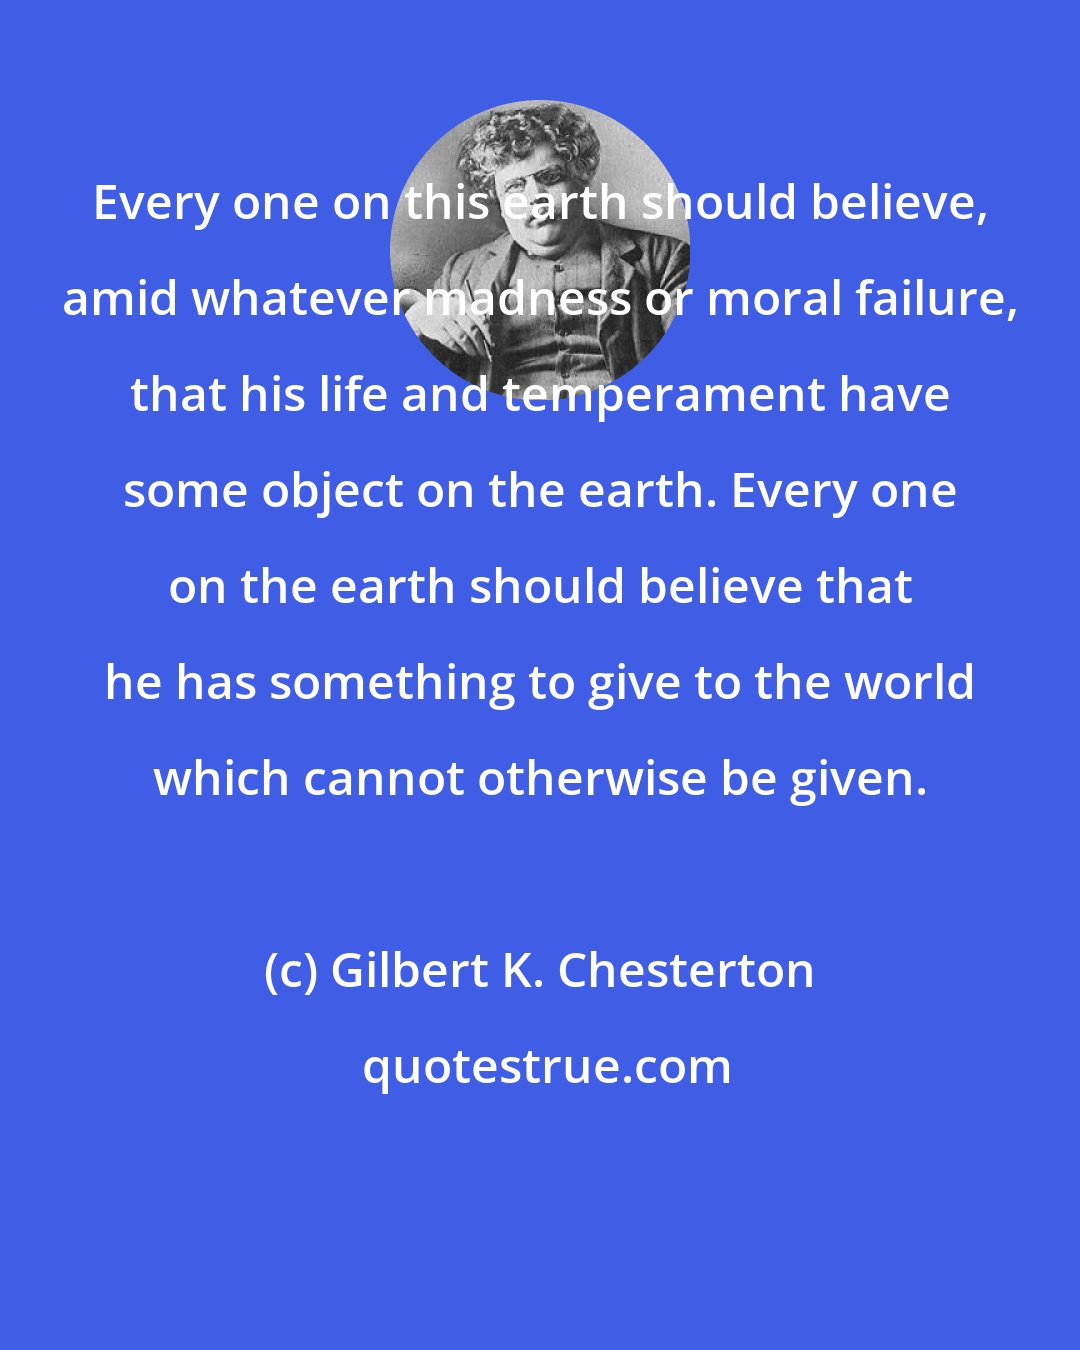 Gilbert K. Chesterton: Every one on this earth should believe, amid whatever madness or moral failure, that his life and temperament have some object on the earth. Every one on the earth should believe that he has something to give to the world which cannot otherwise be given.